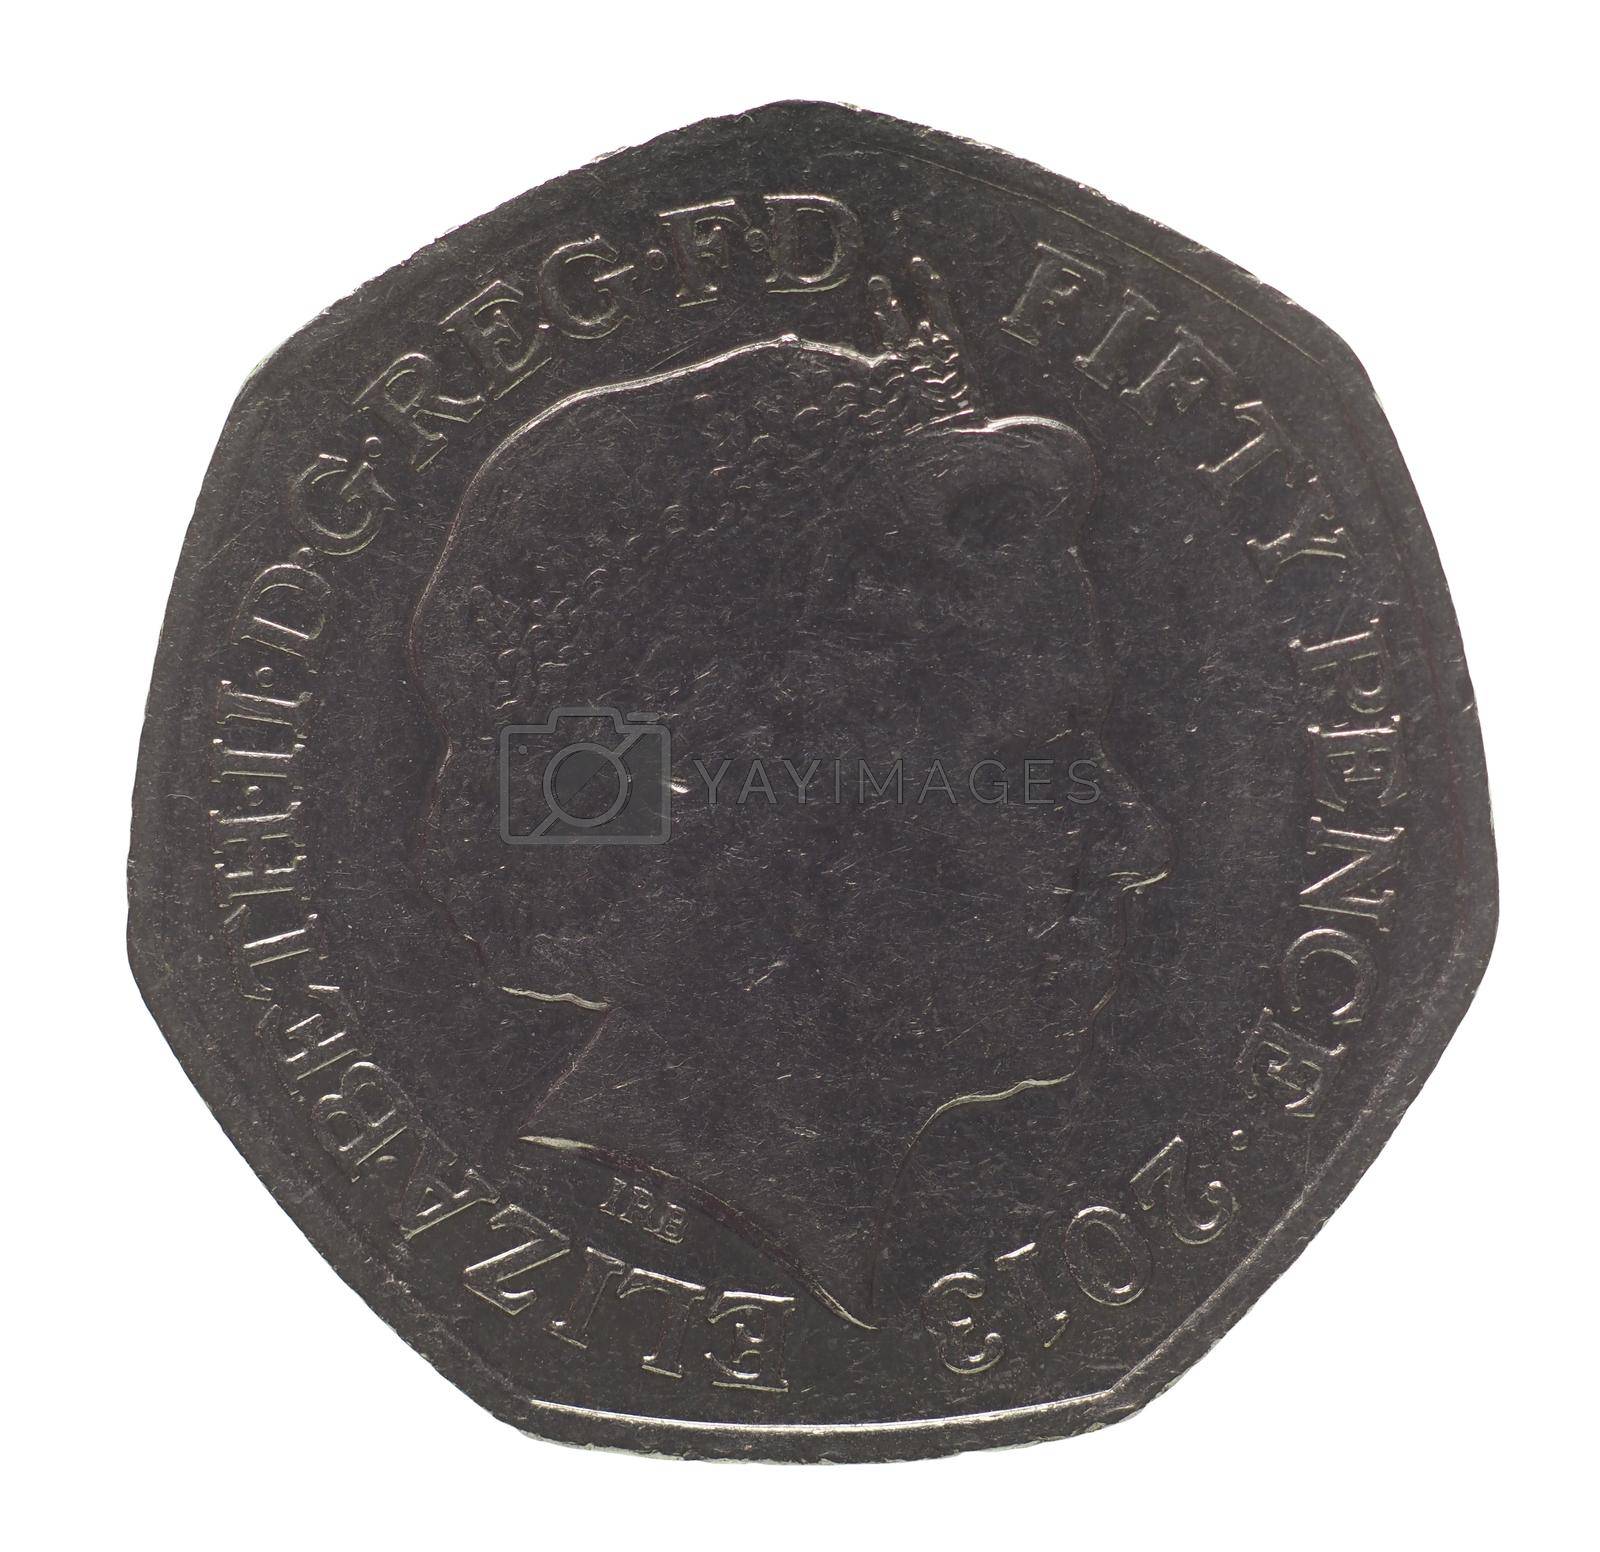 Royalty free image of 20 pence coin, obverse showing the Queen, currency of the UK isolated over white by claudiodivizia